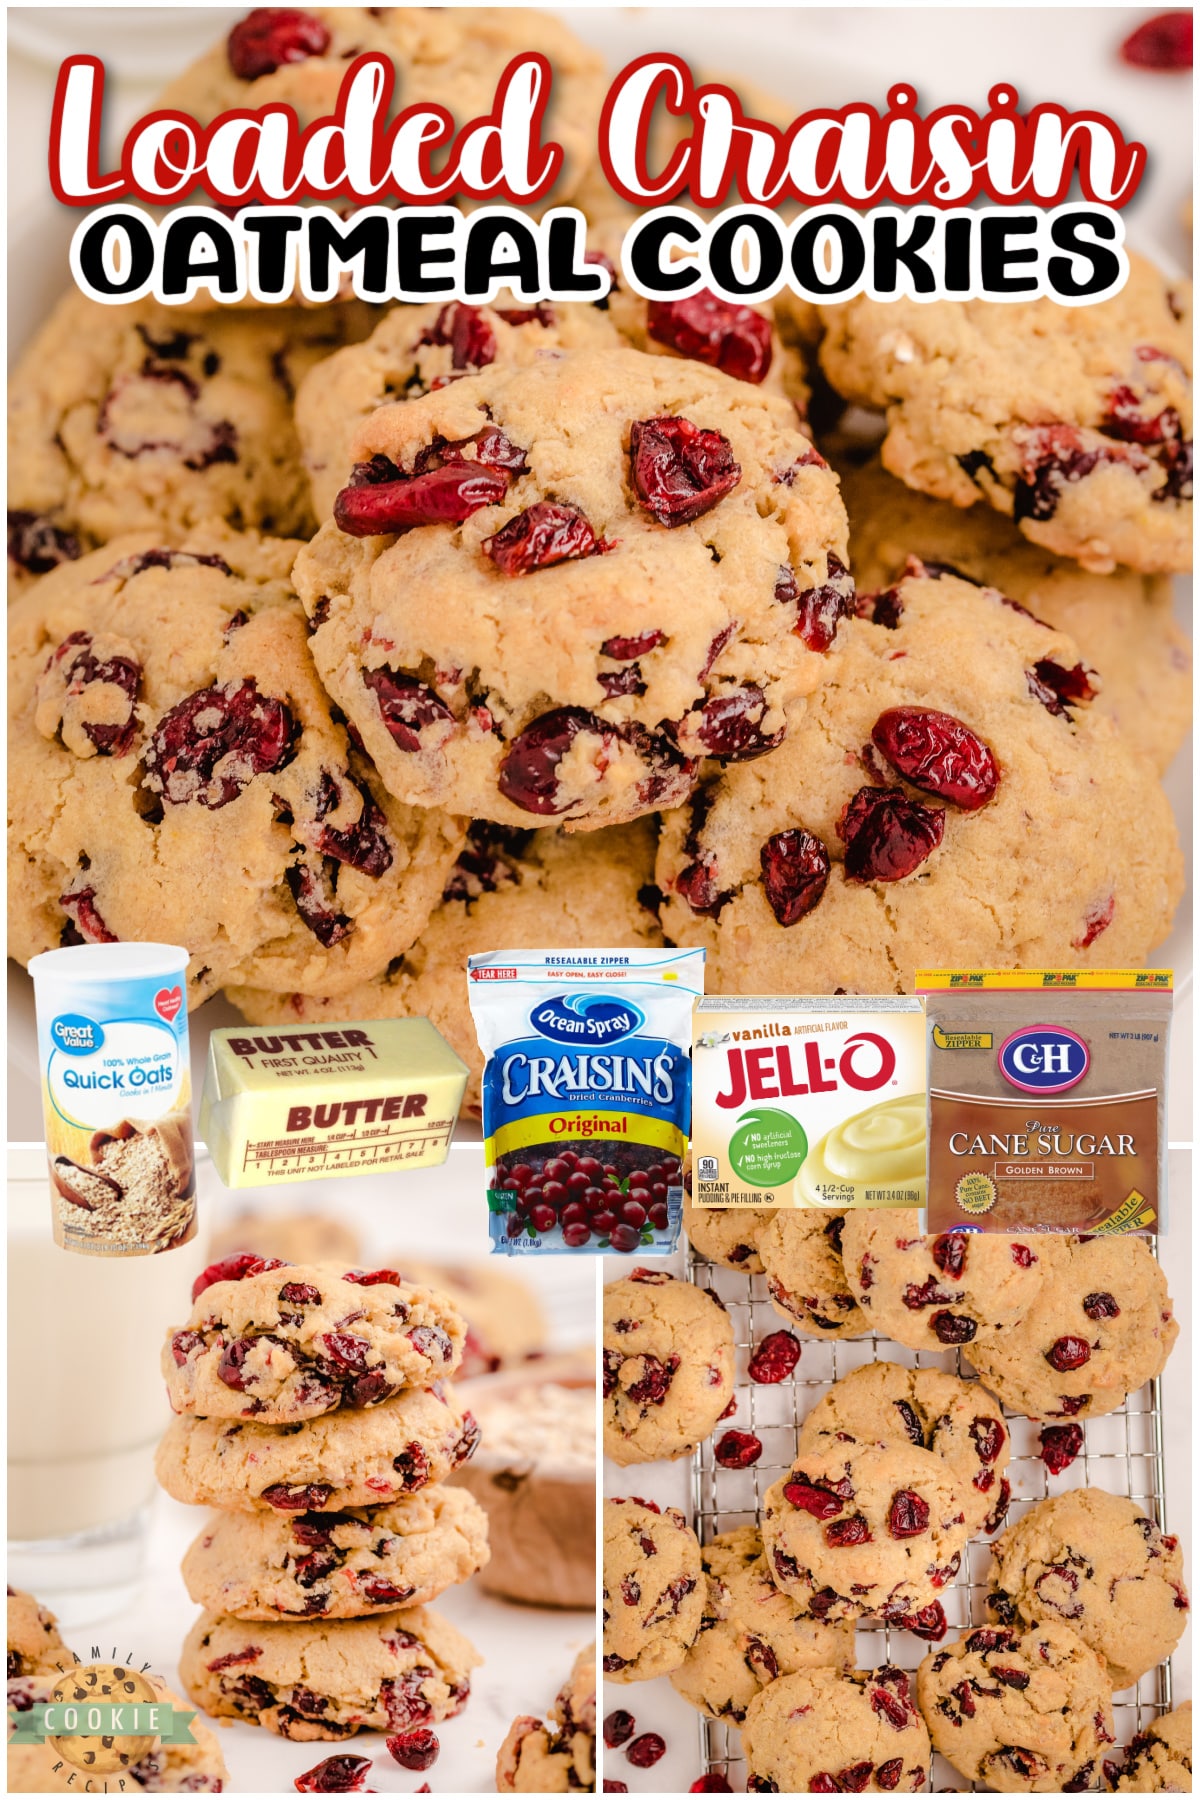 Oatmeal Craisin Cookies are soft & chewy with fantastic cranberry flavor! Oatmeal cookies with buttery crisp edges & a soft center bursting with Craisins! 